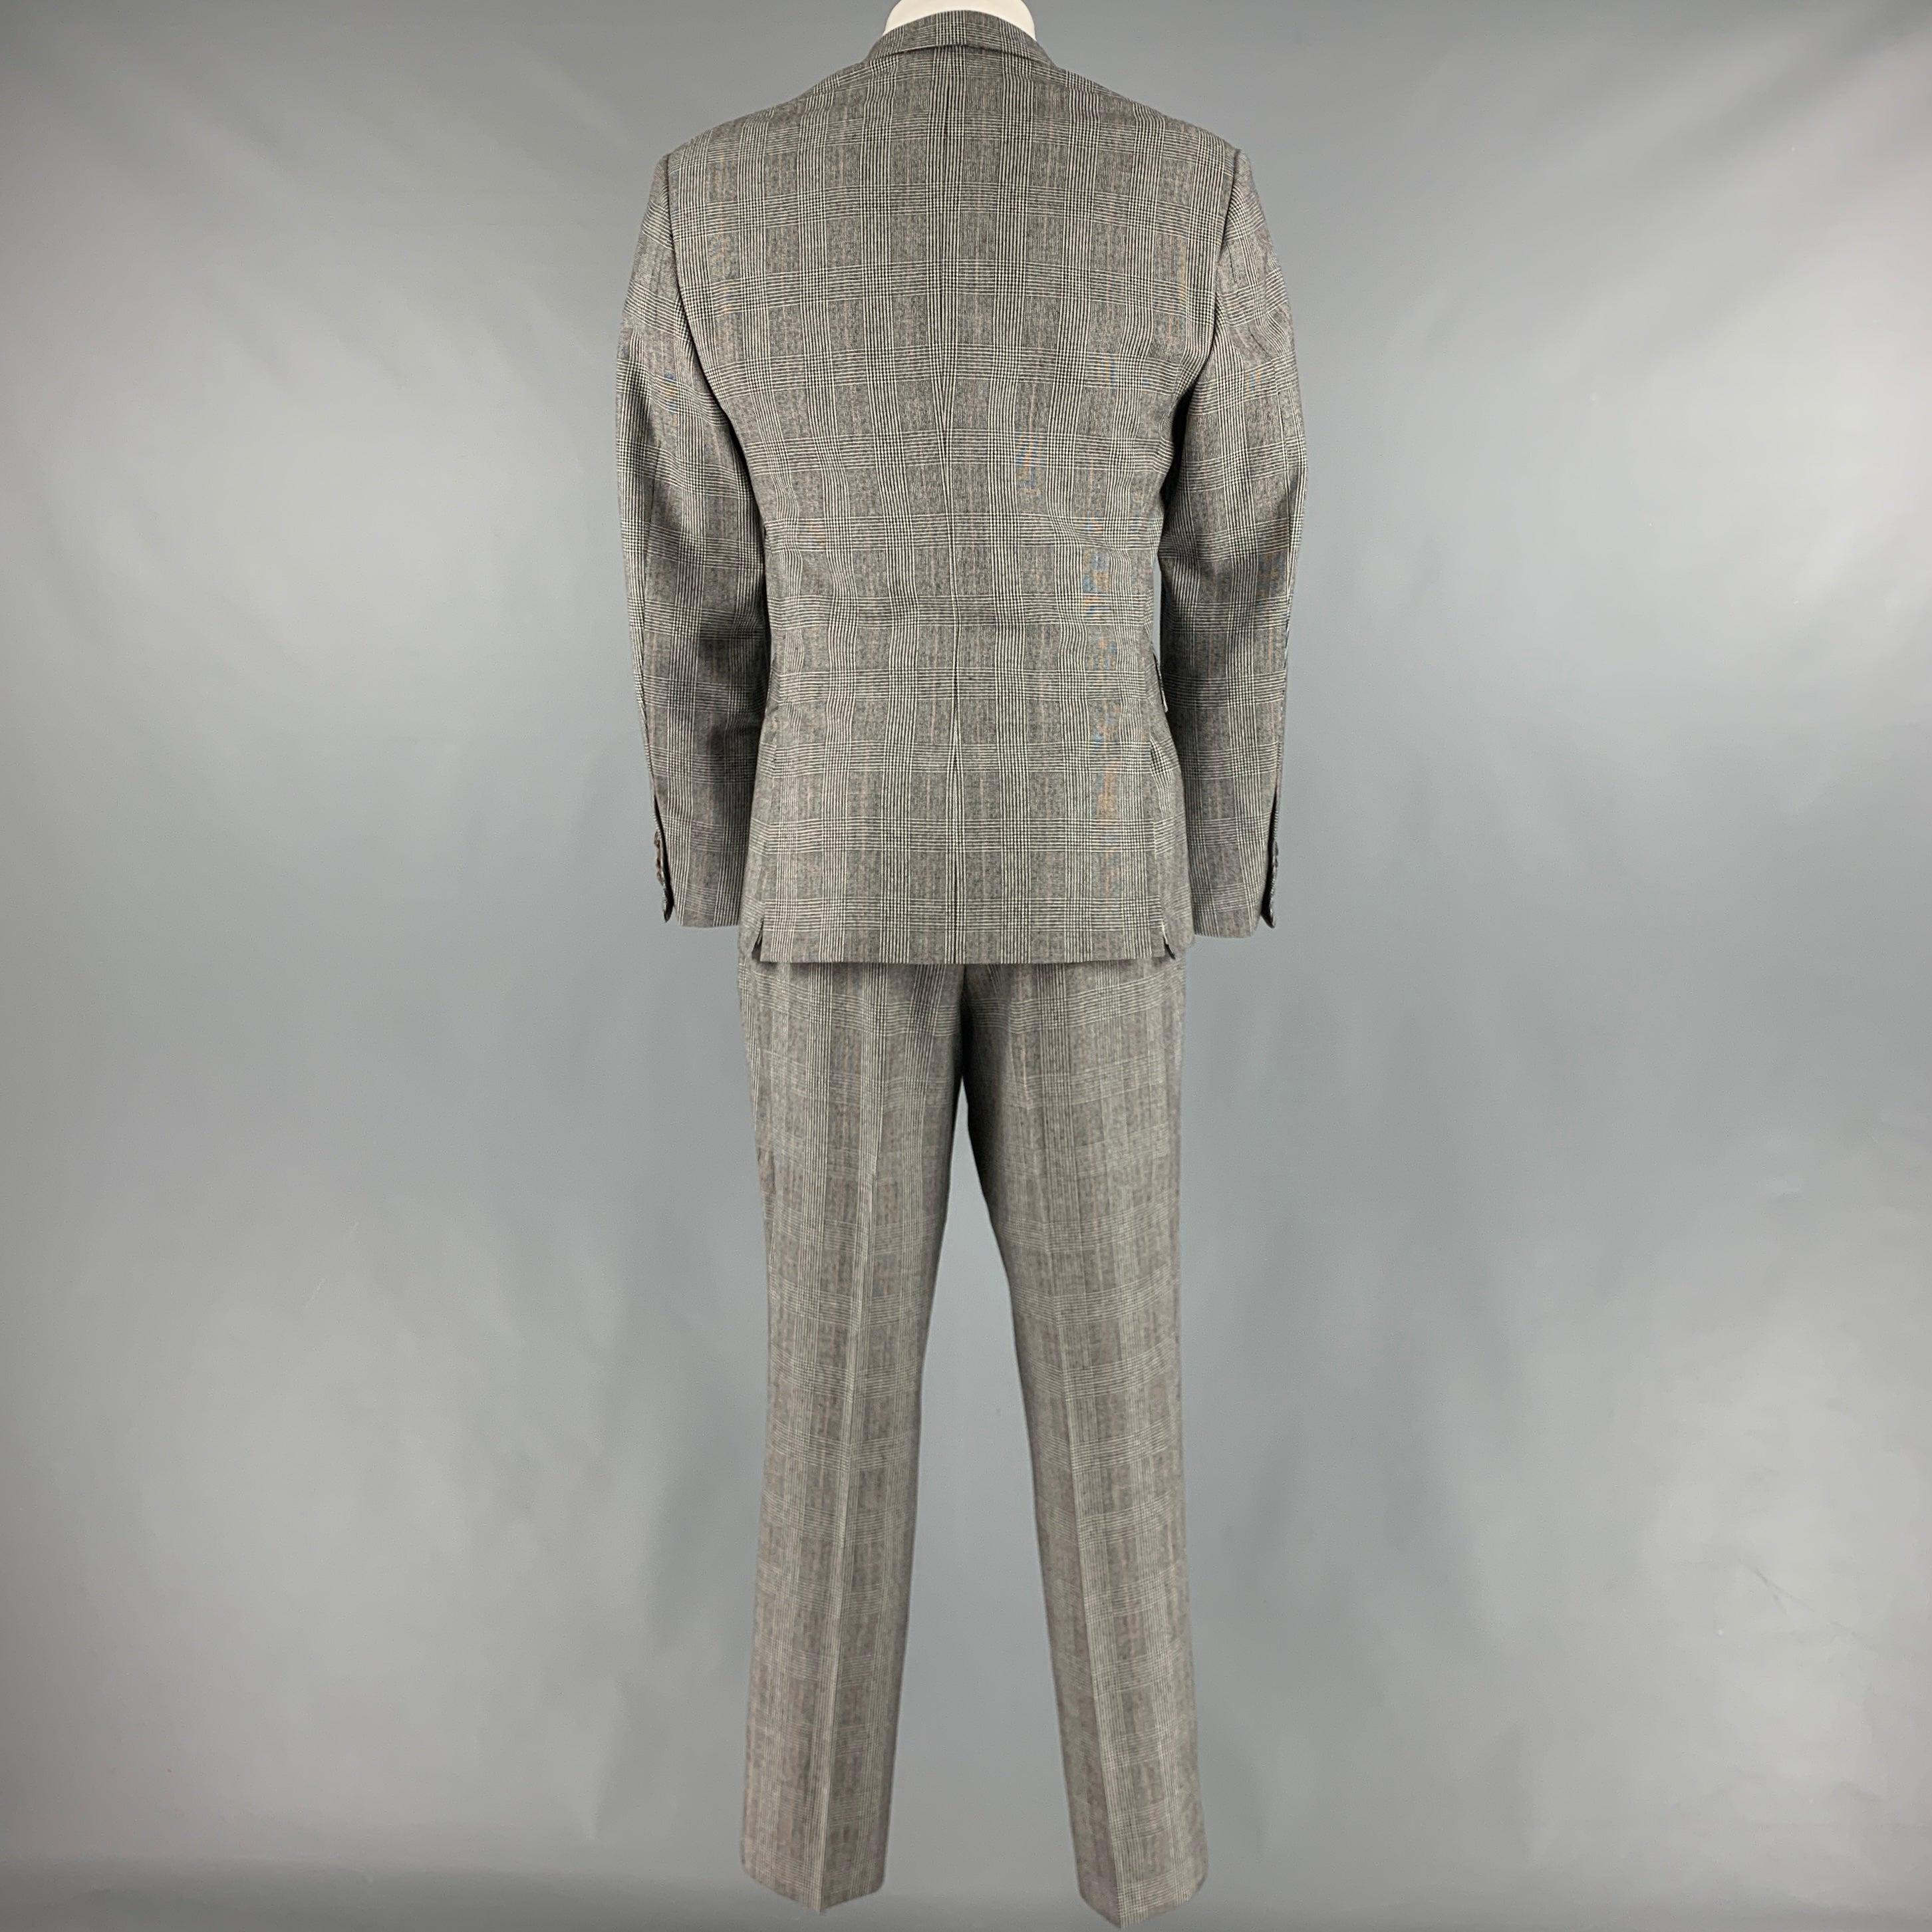 THOM BROWNE Size 40 Black White Glenplaid Wool Notch Lapel Suit In Excellent Condition For Sale In San Francisco, CA